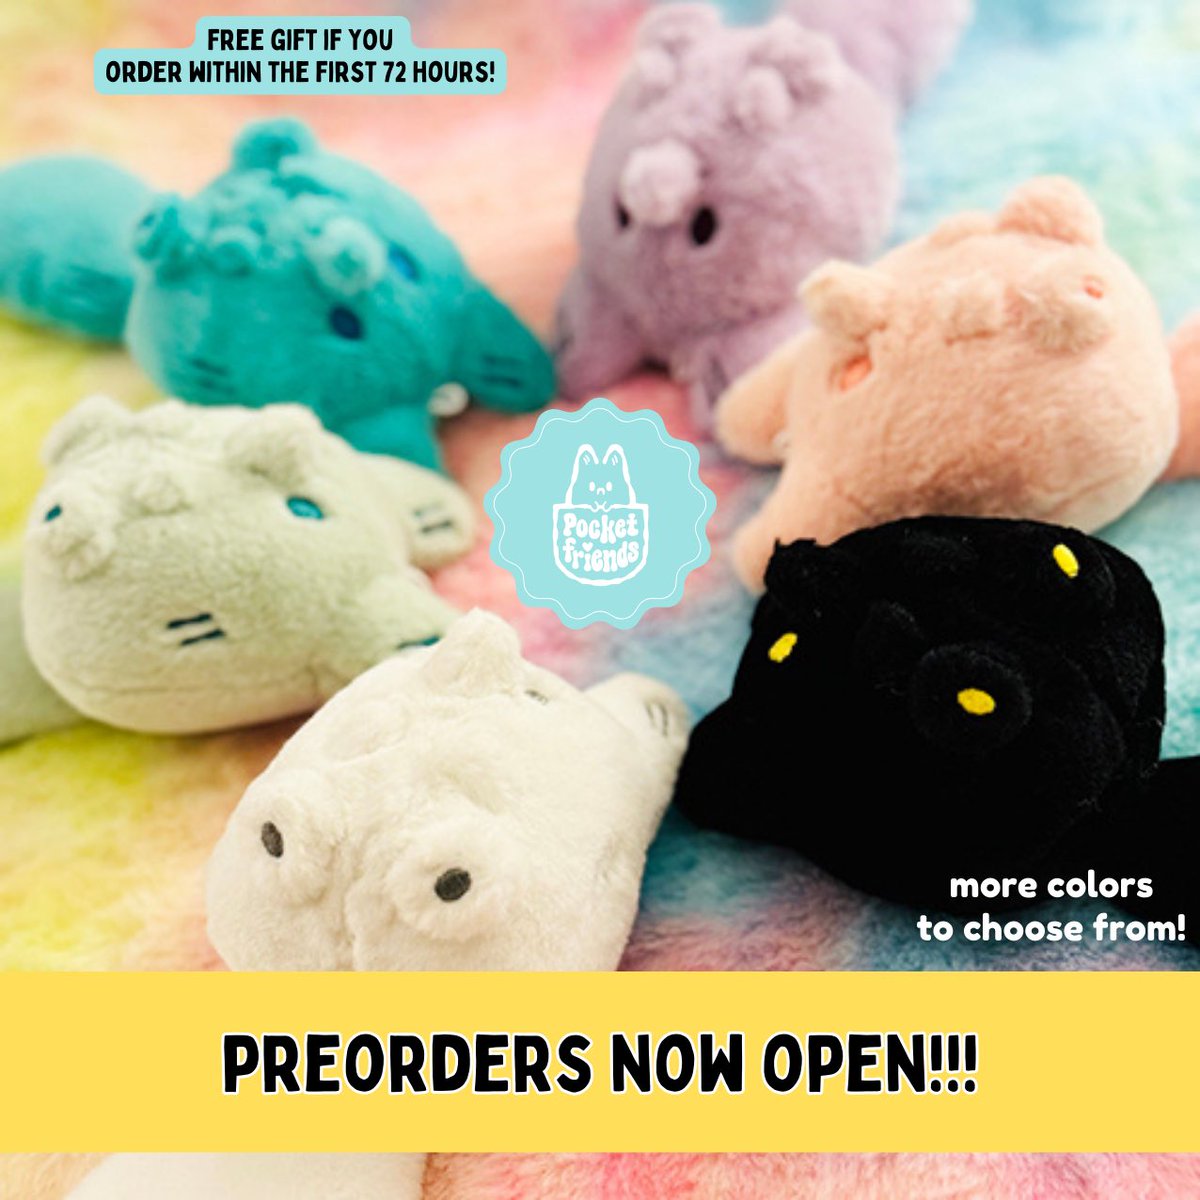 If you missed the campaign, now is your chance to take home some Pocket Friends plush toys! If you within the first 72 hours then you get a free gift!